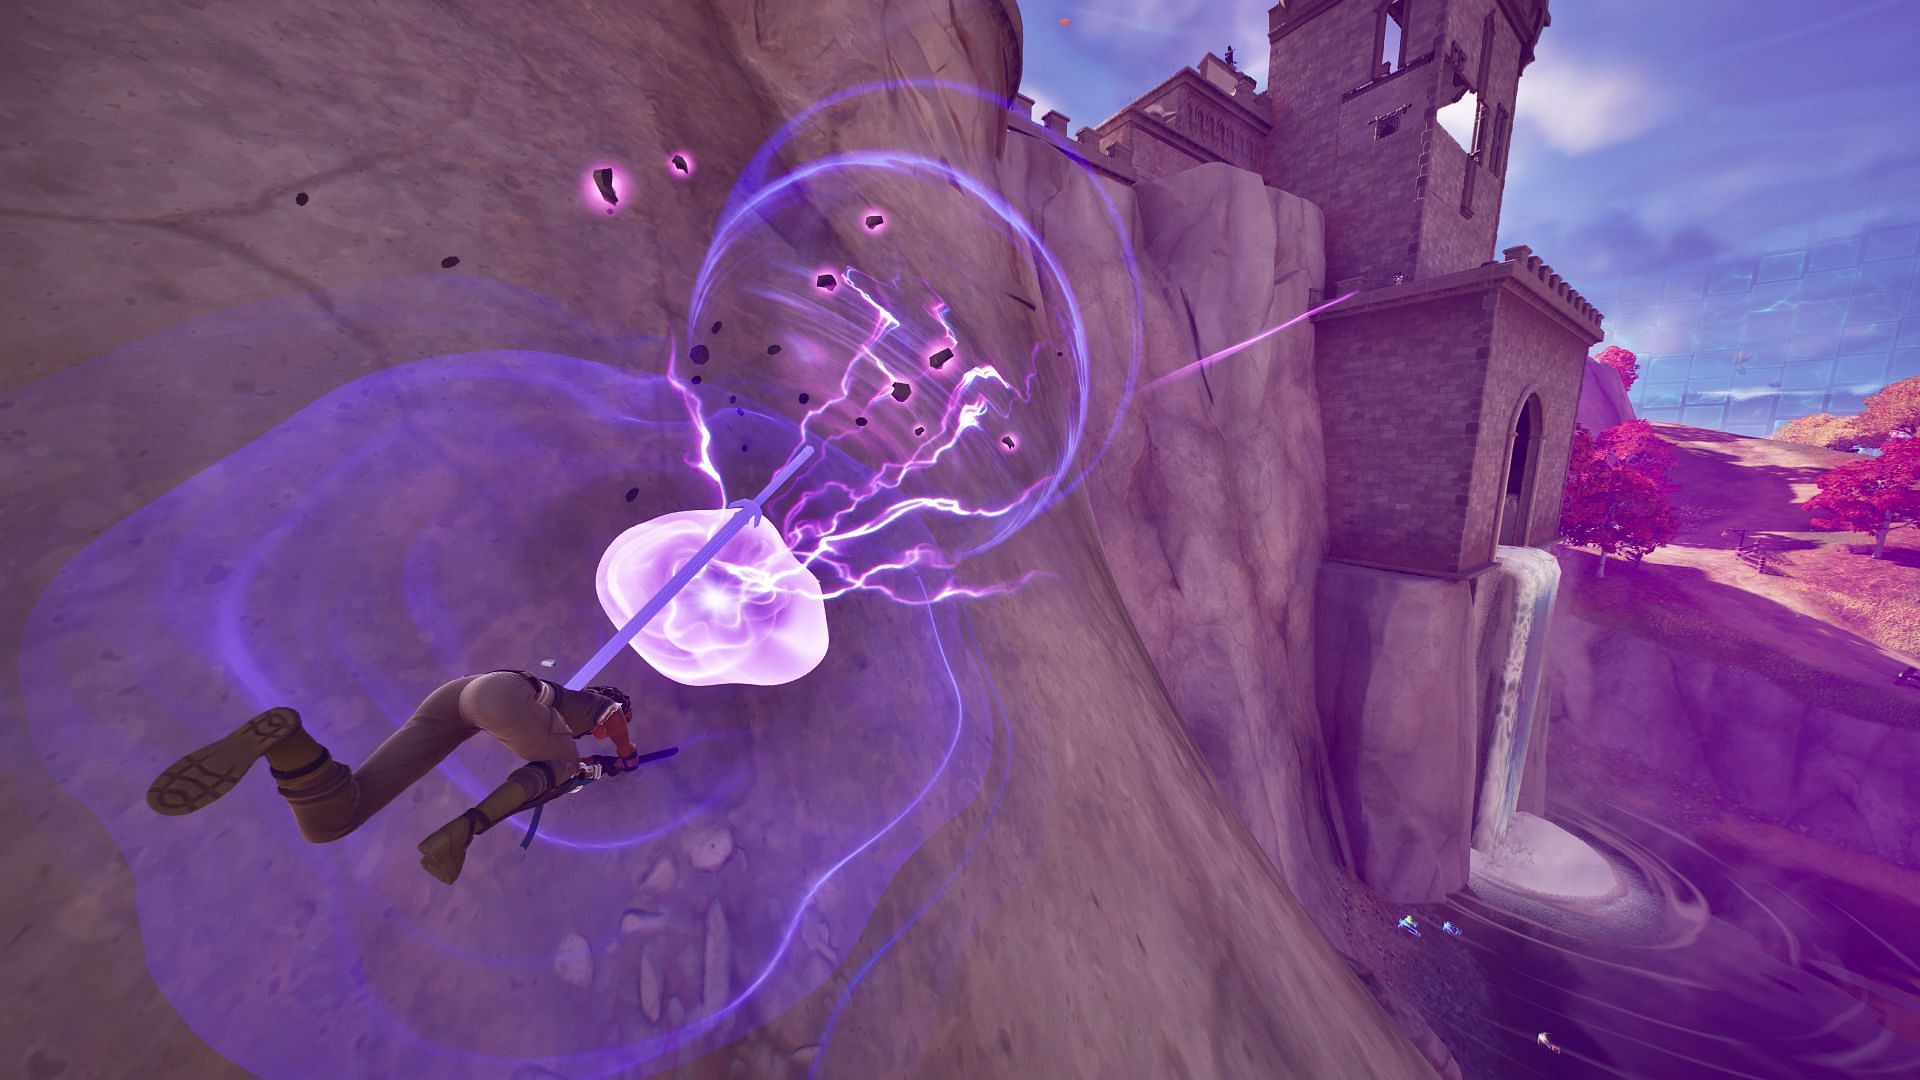 Sometimes using a Shockwave Hammer to escape Ex-Caliber 'rounds' doesn't go according to plan (Image via Epic Games/Fortnite)